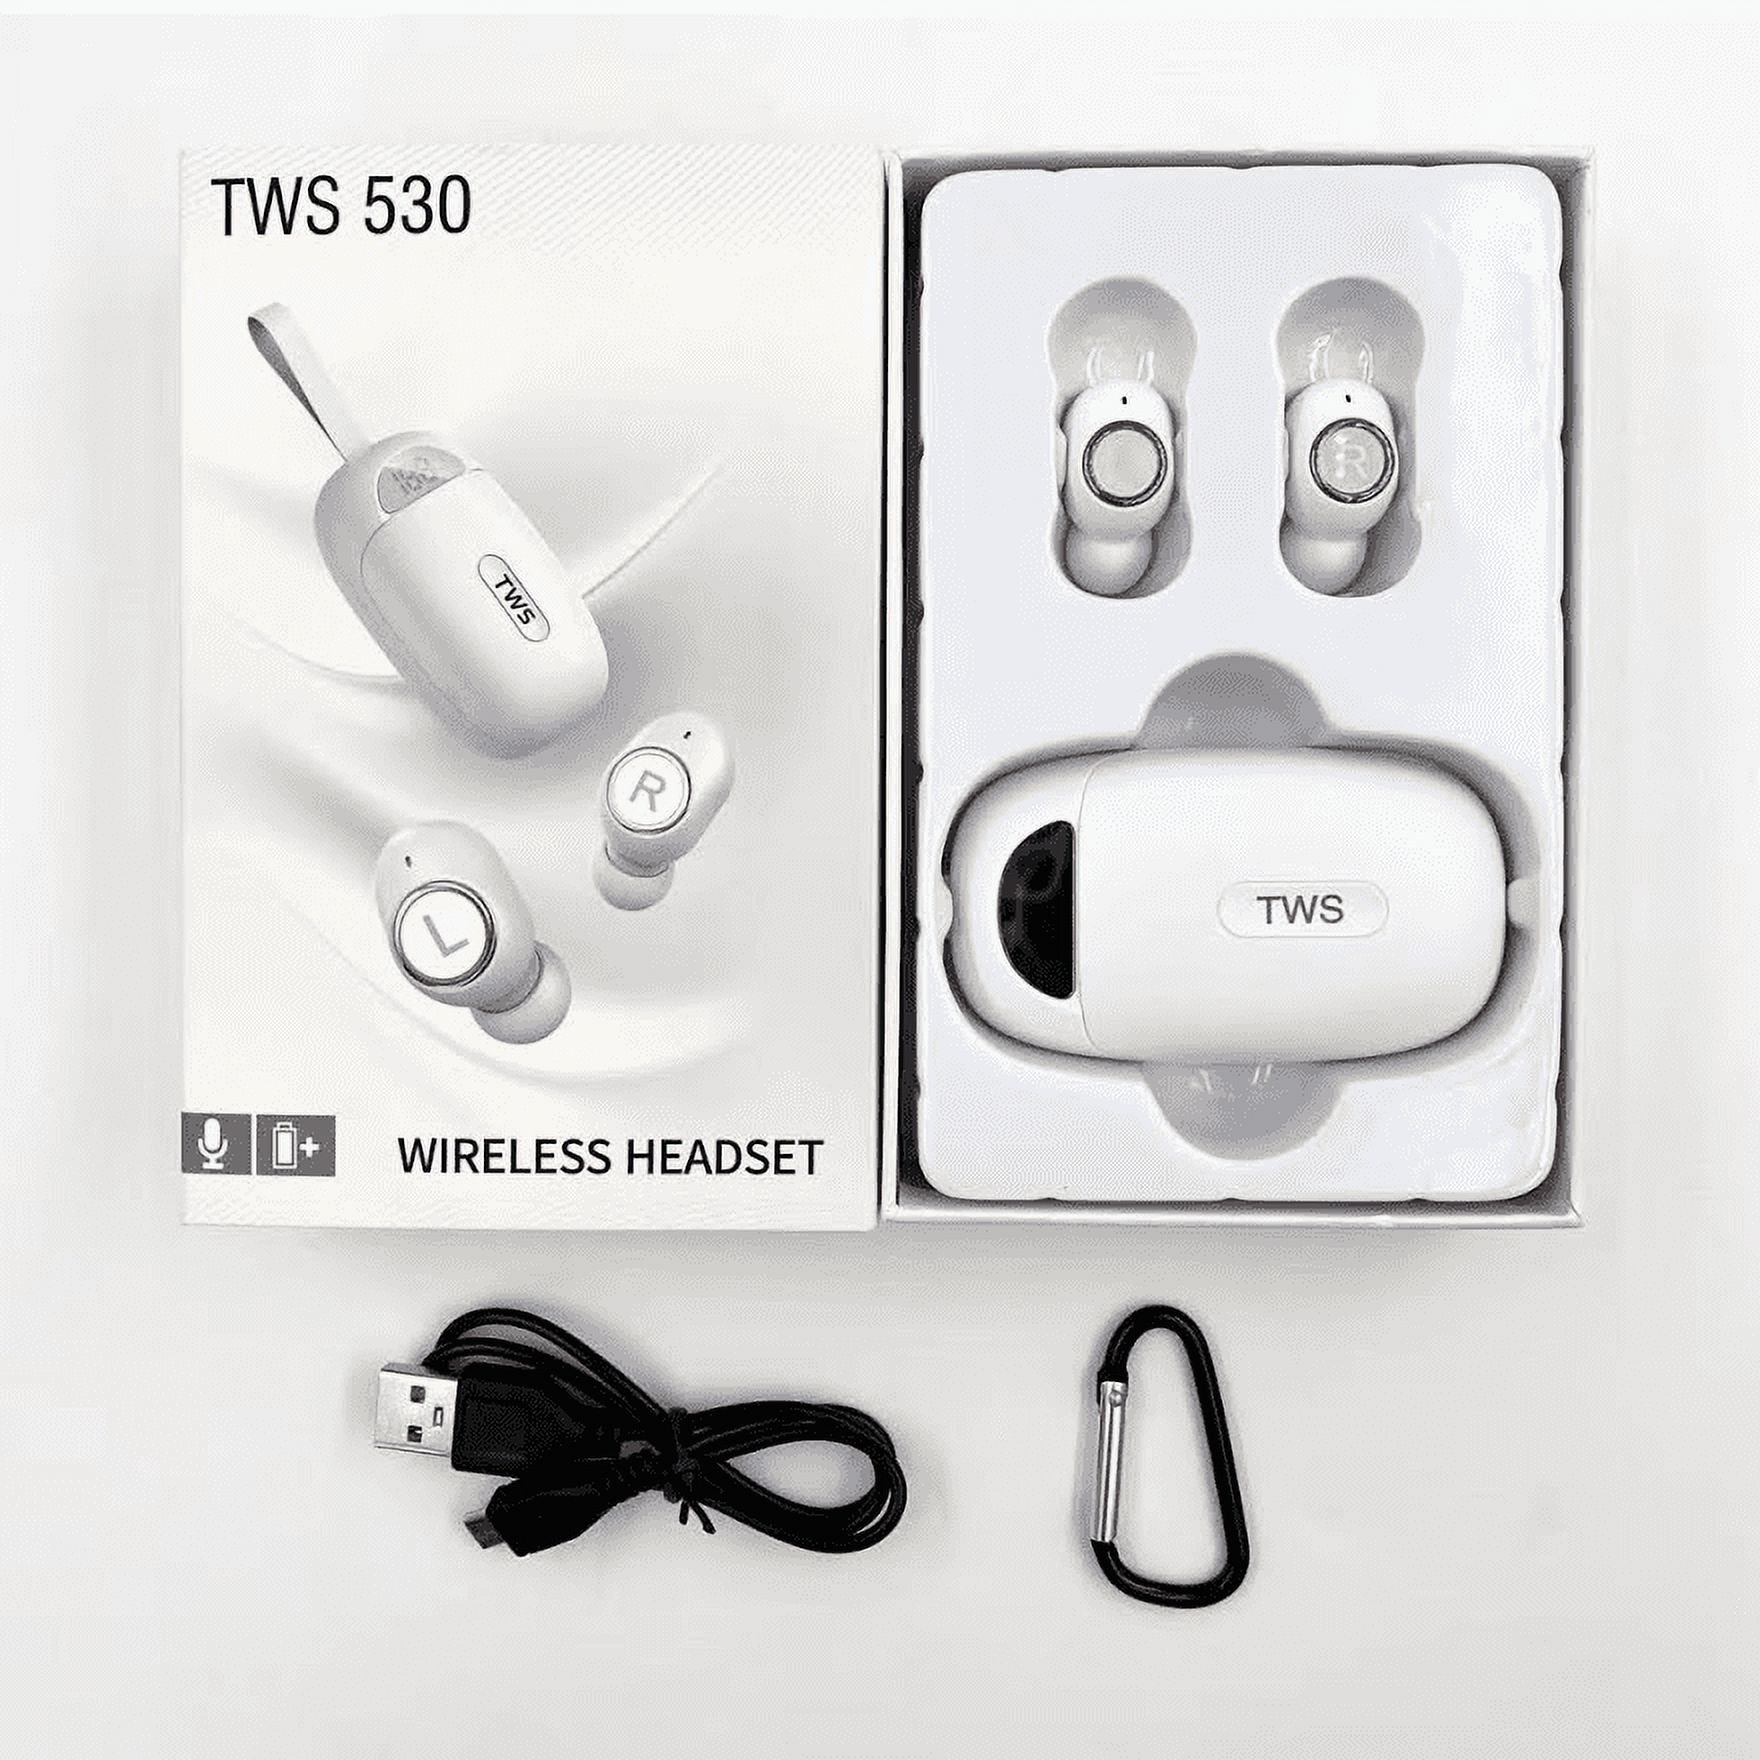 Wireless Earbuds For Samsung Galaxy S9 , with Immersive Sound True 5.0 Bluetooth in-Ear Headphones with 2000mAh Charging Case Stereo Calls Touch Control IPX7 Sweatproof Deep Bass - image 3 of 3